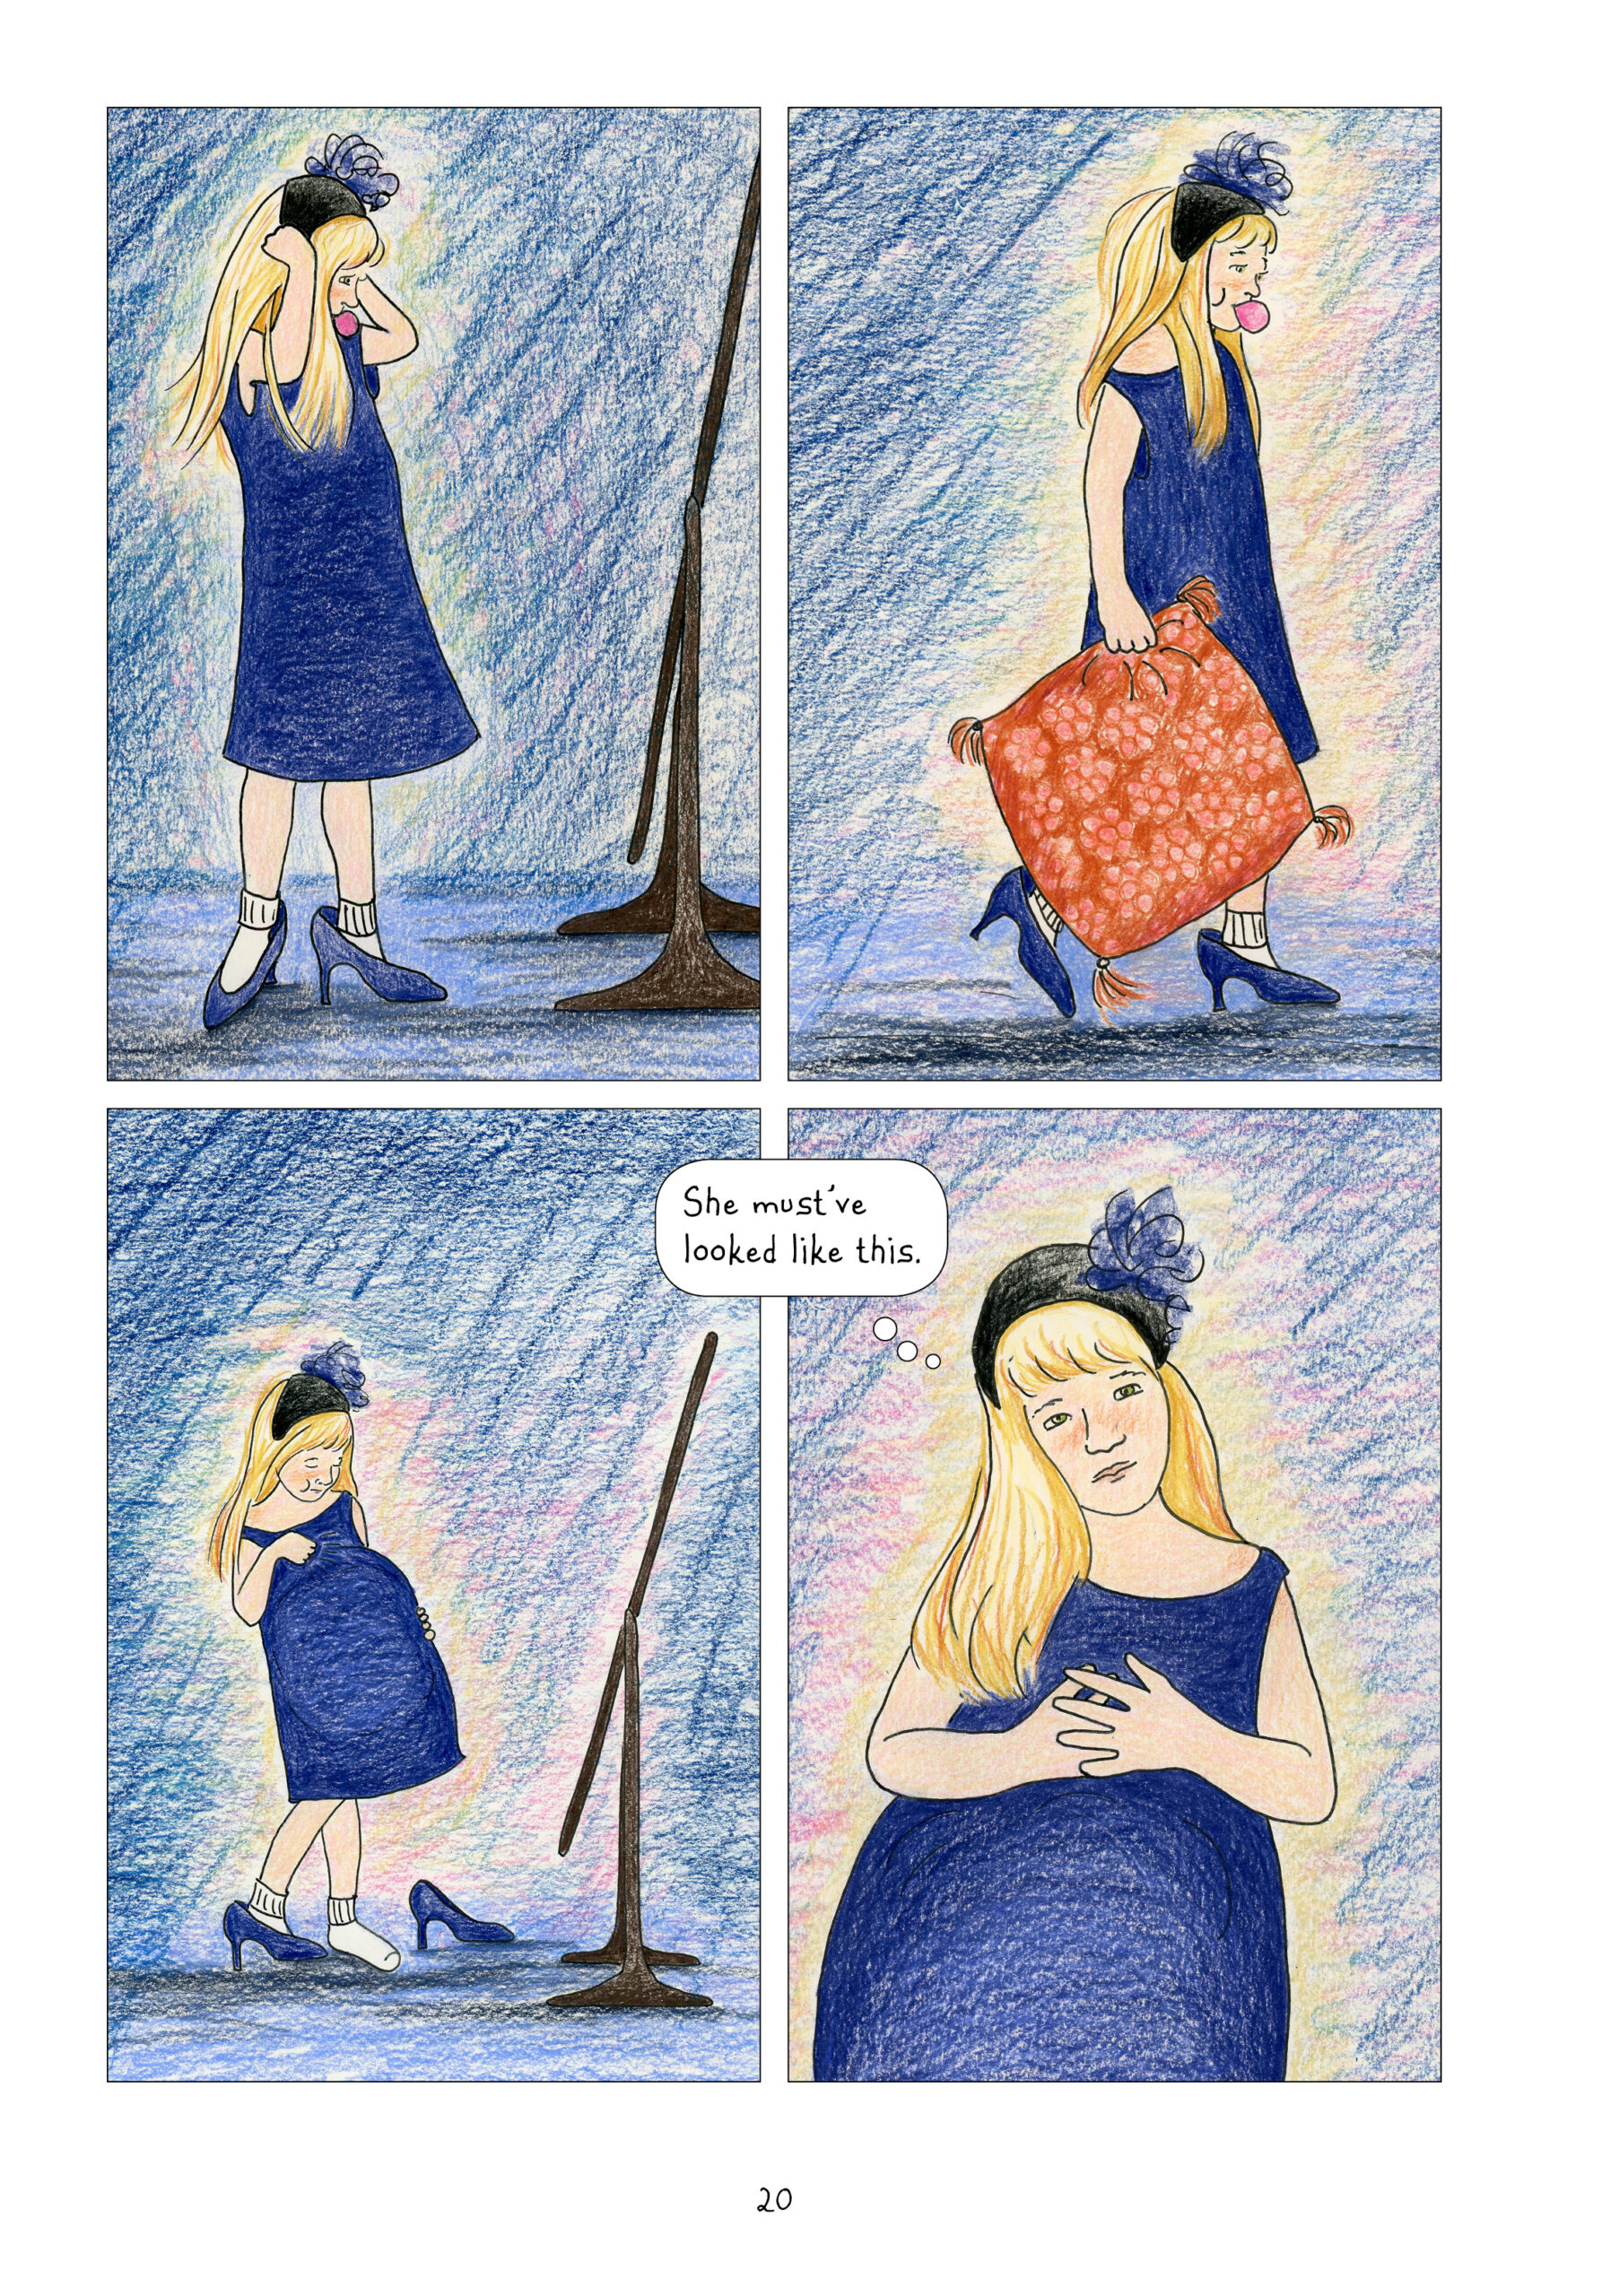 A younger Lynn in full color looks at herself in a full-length mirror. She wears a frilly headband, and a blue dress and blue heels that are too big for her. She is blowing bubbles with bubble gum. 

Lynn holds a pillow in her hand, which she then puts under her dress to mimic a pregnant belly. She takes off one of the heels, eyes closed. 

She gazes directly at the reader, looking solemn and placing her hands over her pillow-belly. She thinks, "She must've looked like this..."